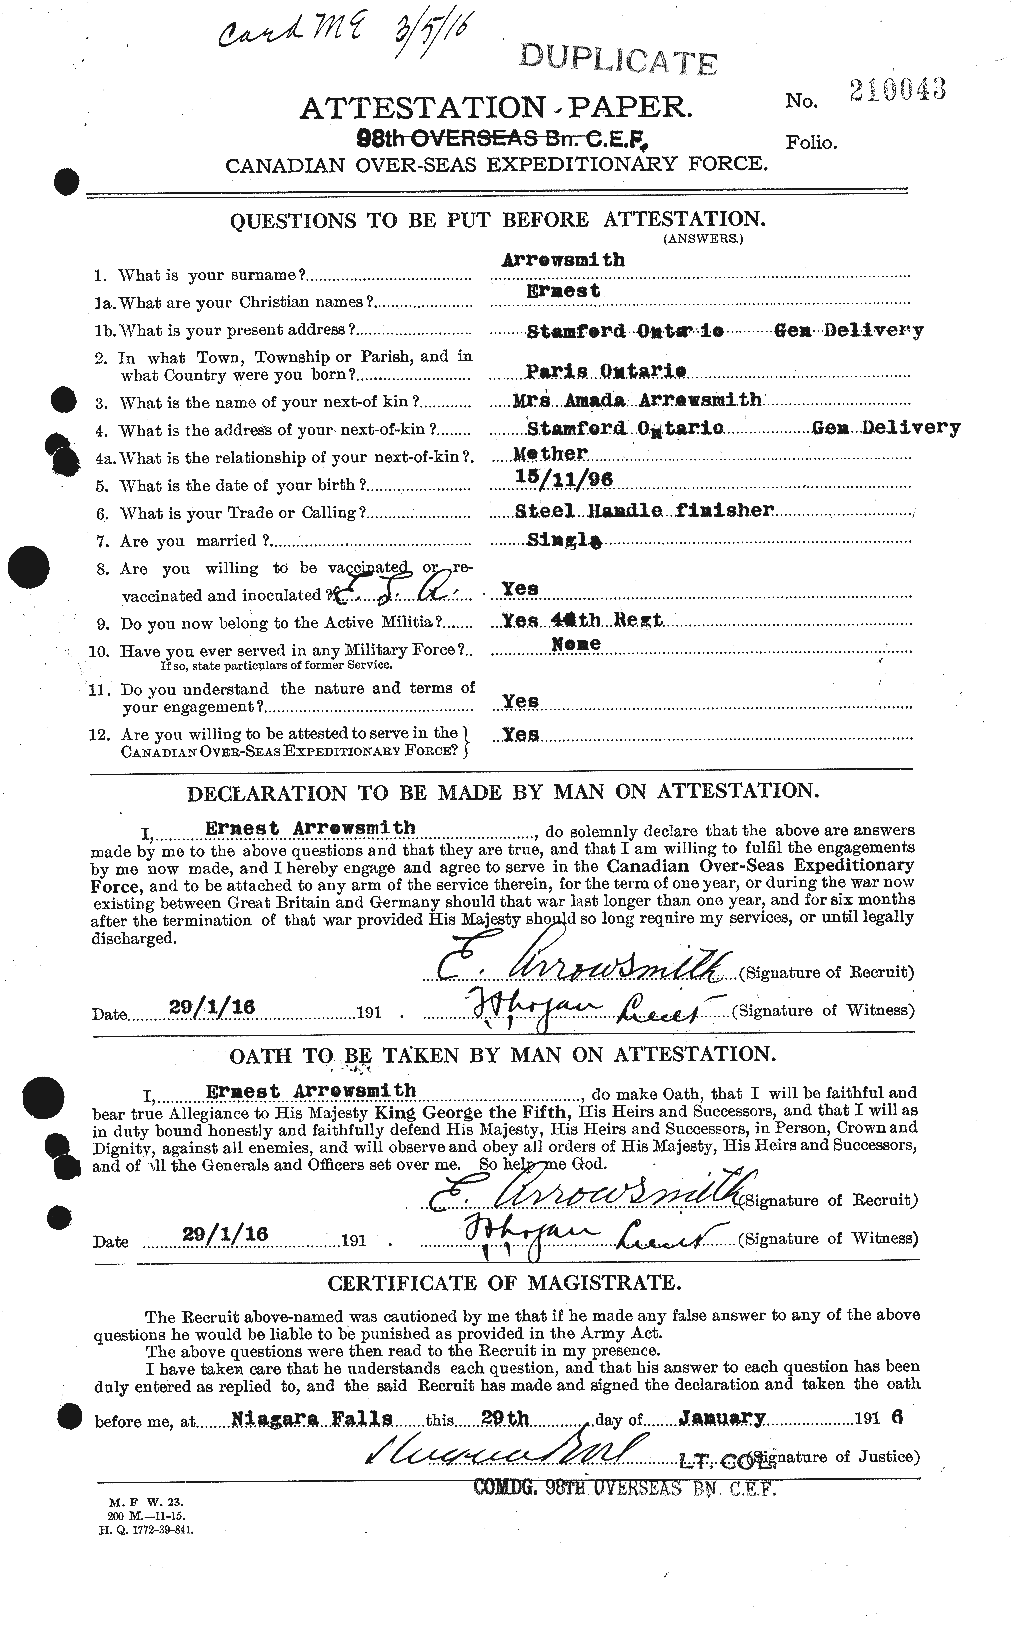 Personnel Records of the First World War - CEF 214295a